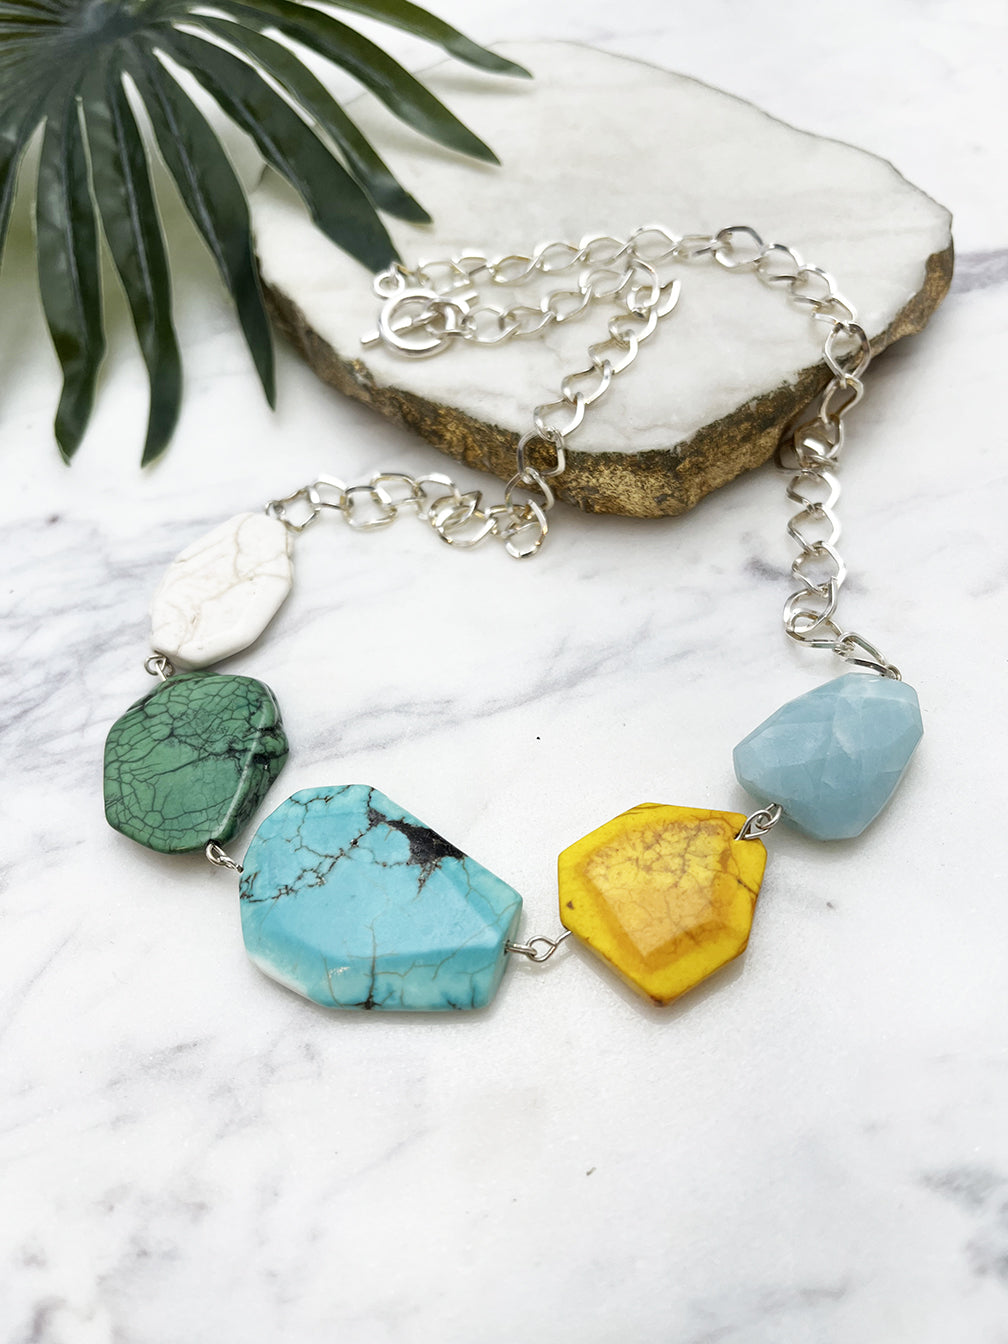 quintet necklace - turquoise and yellow howlite